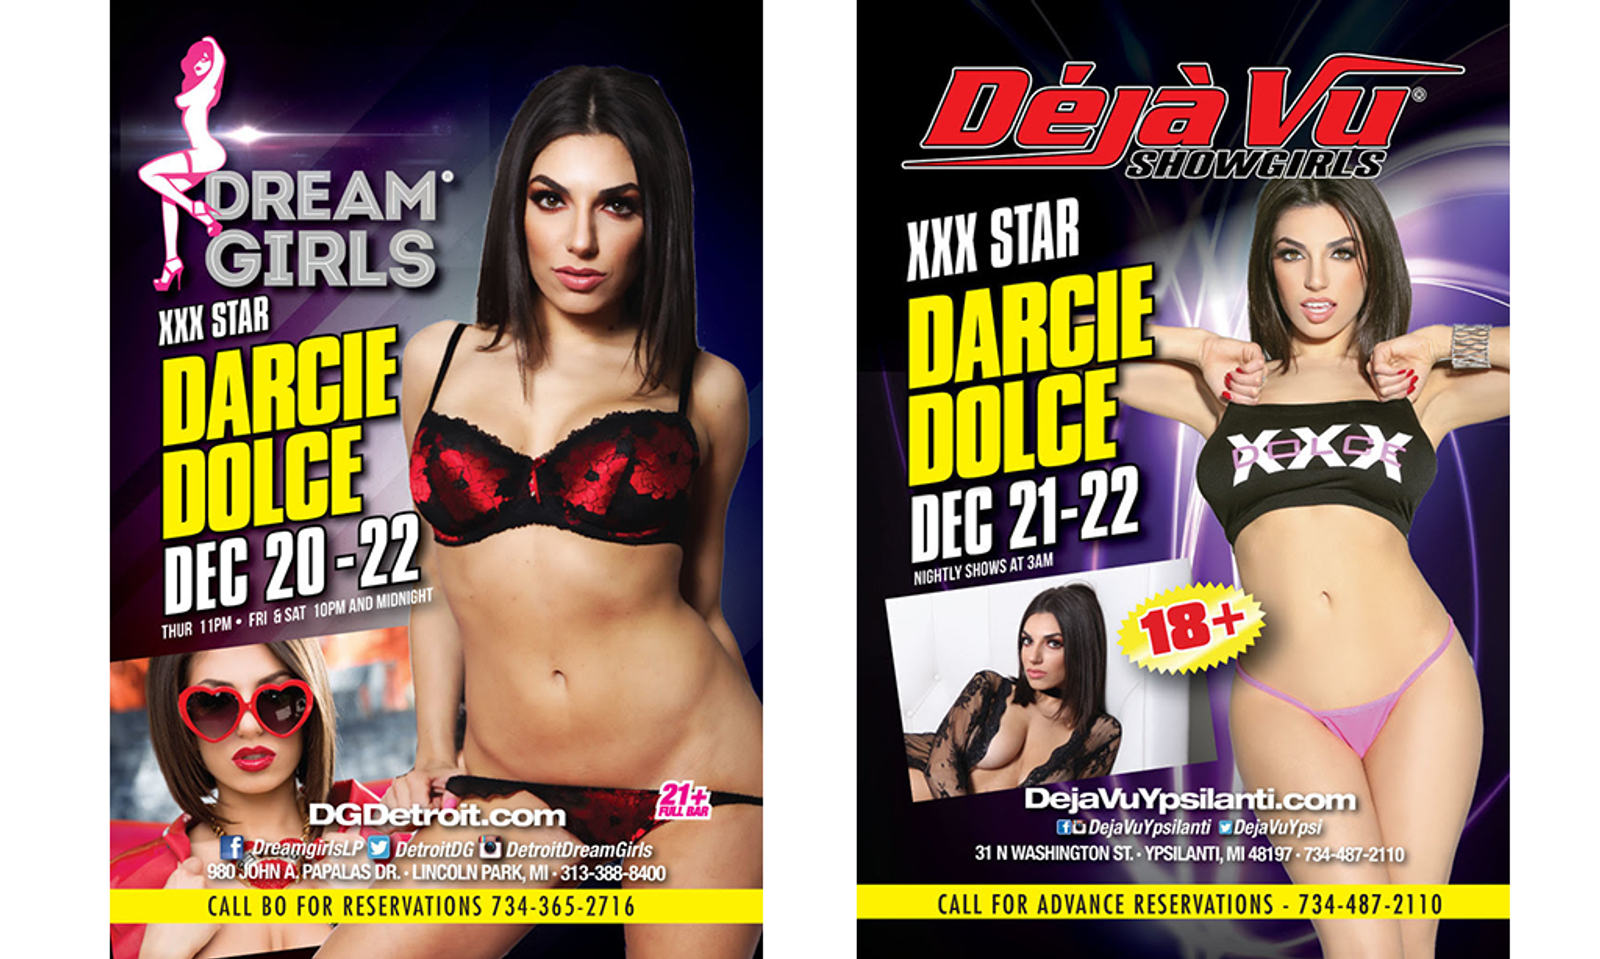 Darcie Dolce To Feature at Two Michigan Clubs This Weekend